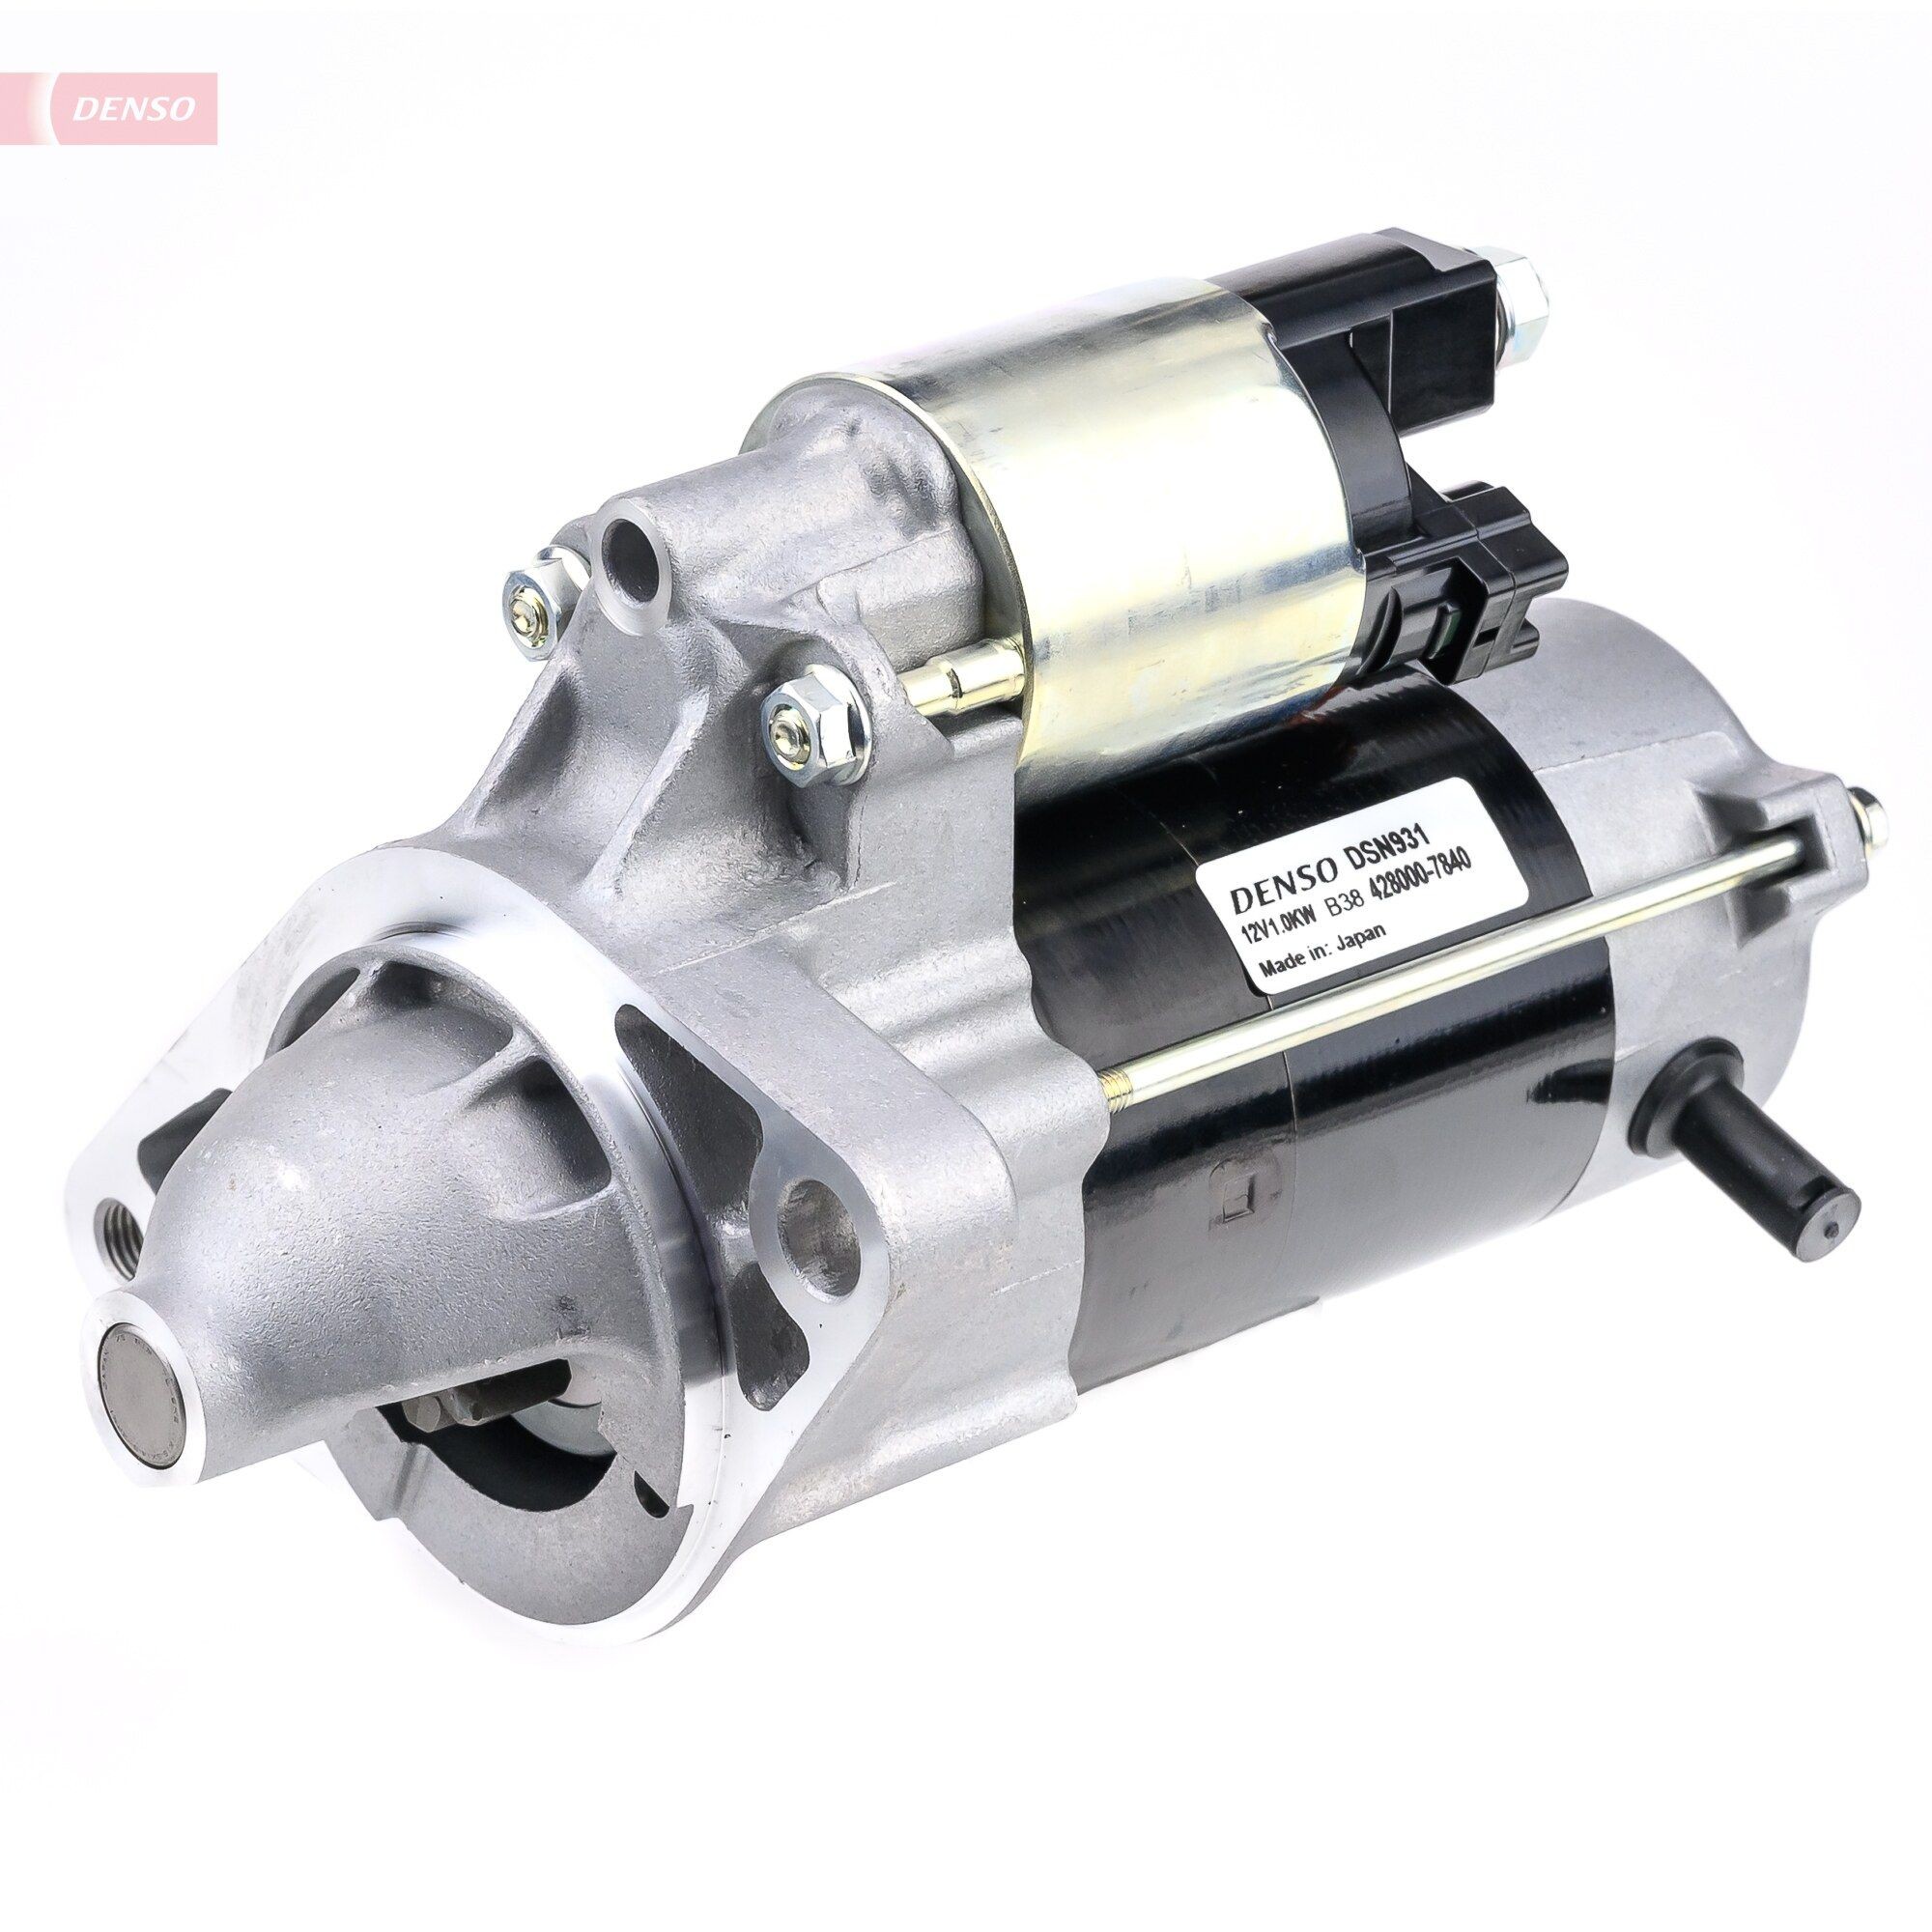 DENSO DSN931 Starter motor DACIA experience and price